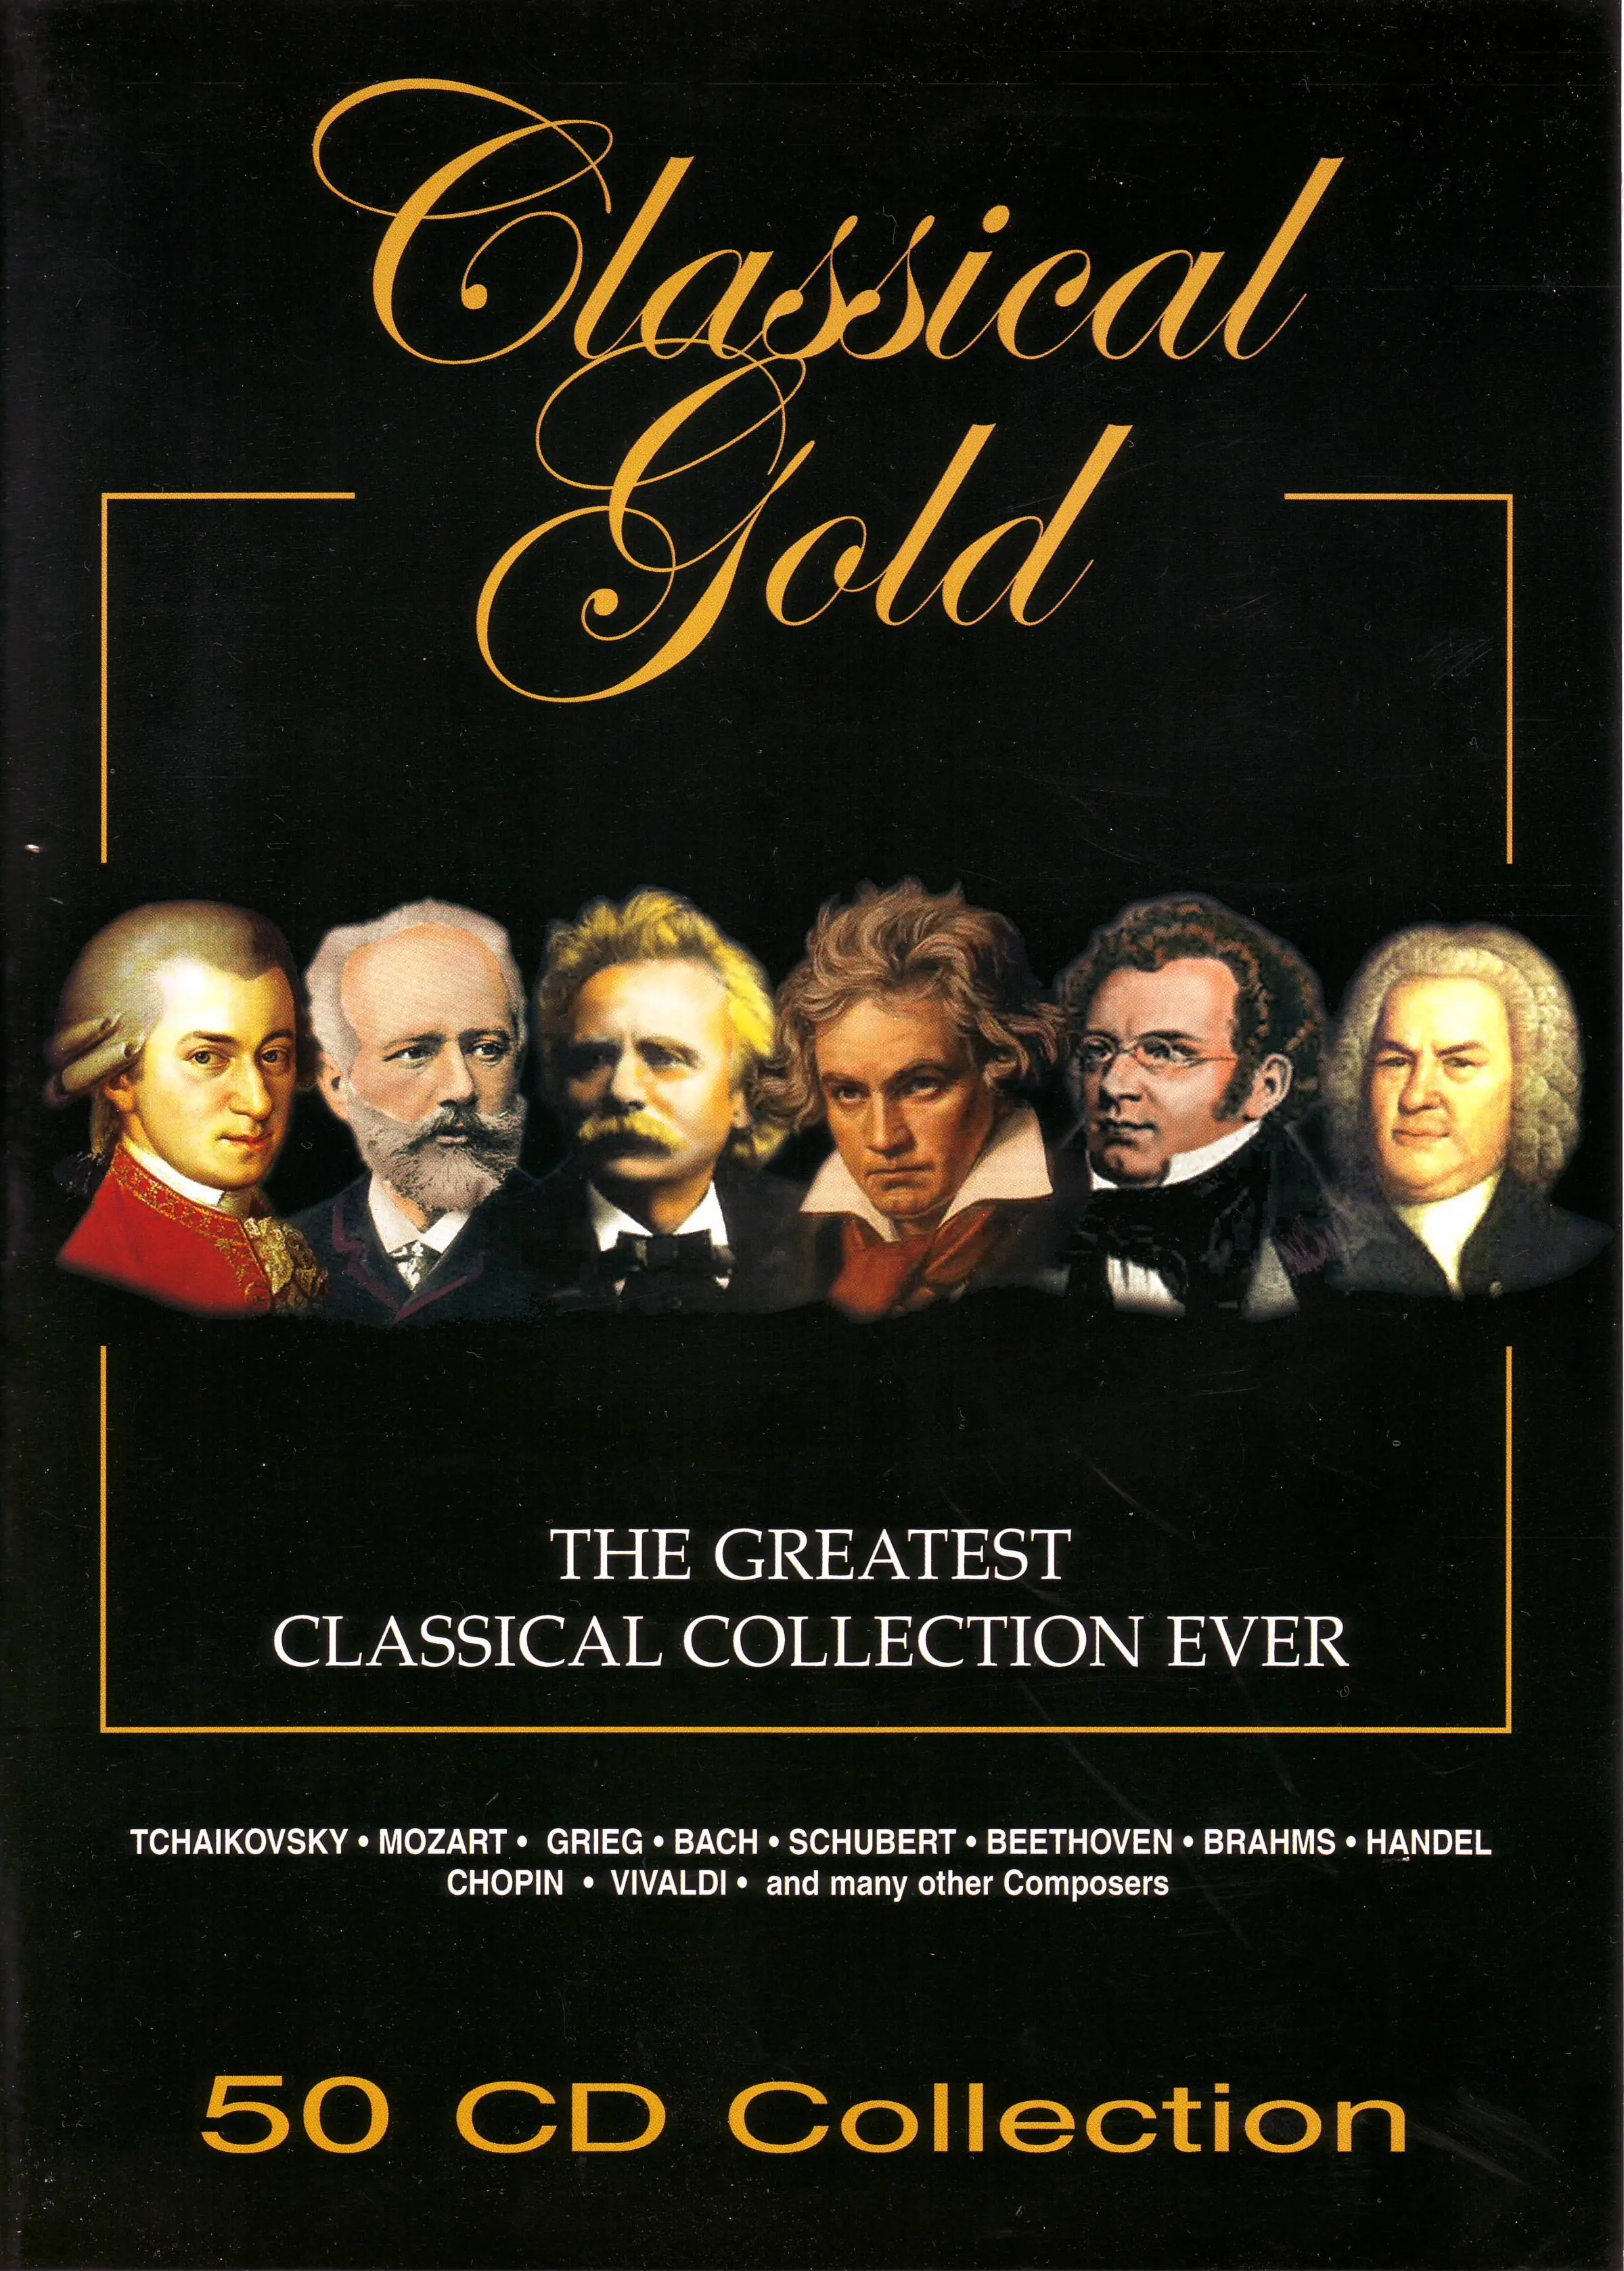 V.A. - Classical Gold: The Greatest Classical Collection Ever (50CD Box